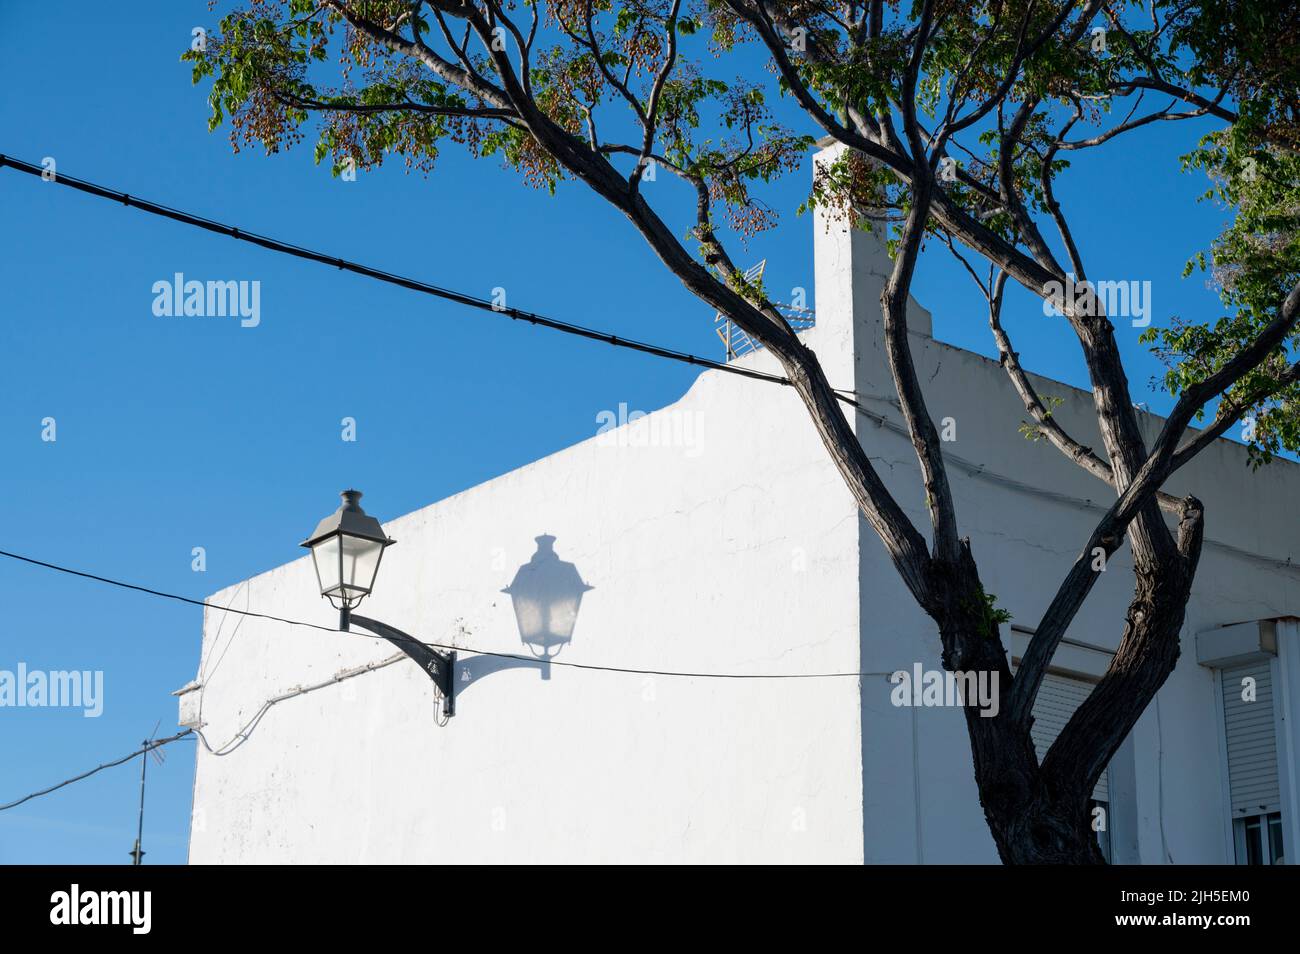 An abstract view of a an old lamp on the side of a white house in Puerto de Santa Maria Spain with a tree growing in front and power cables Stock Photo